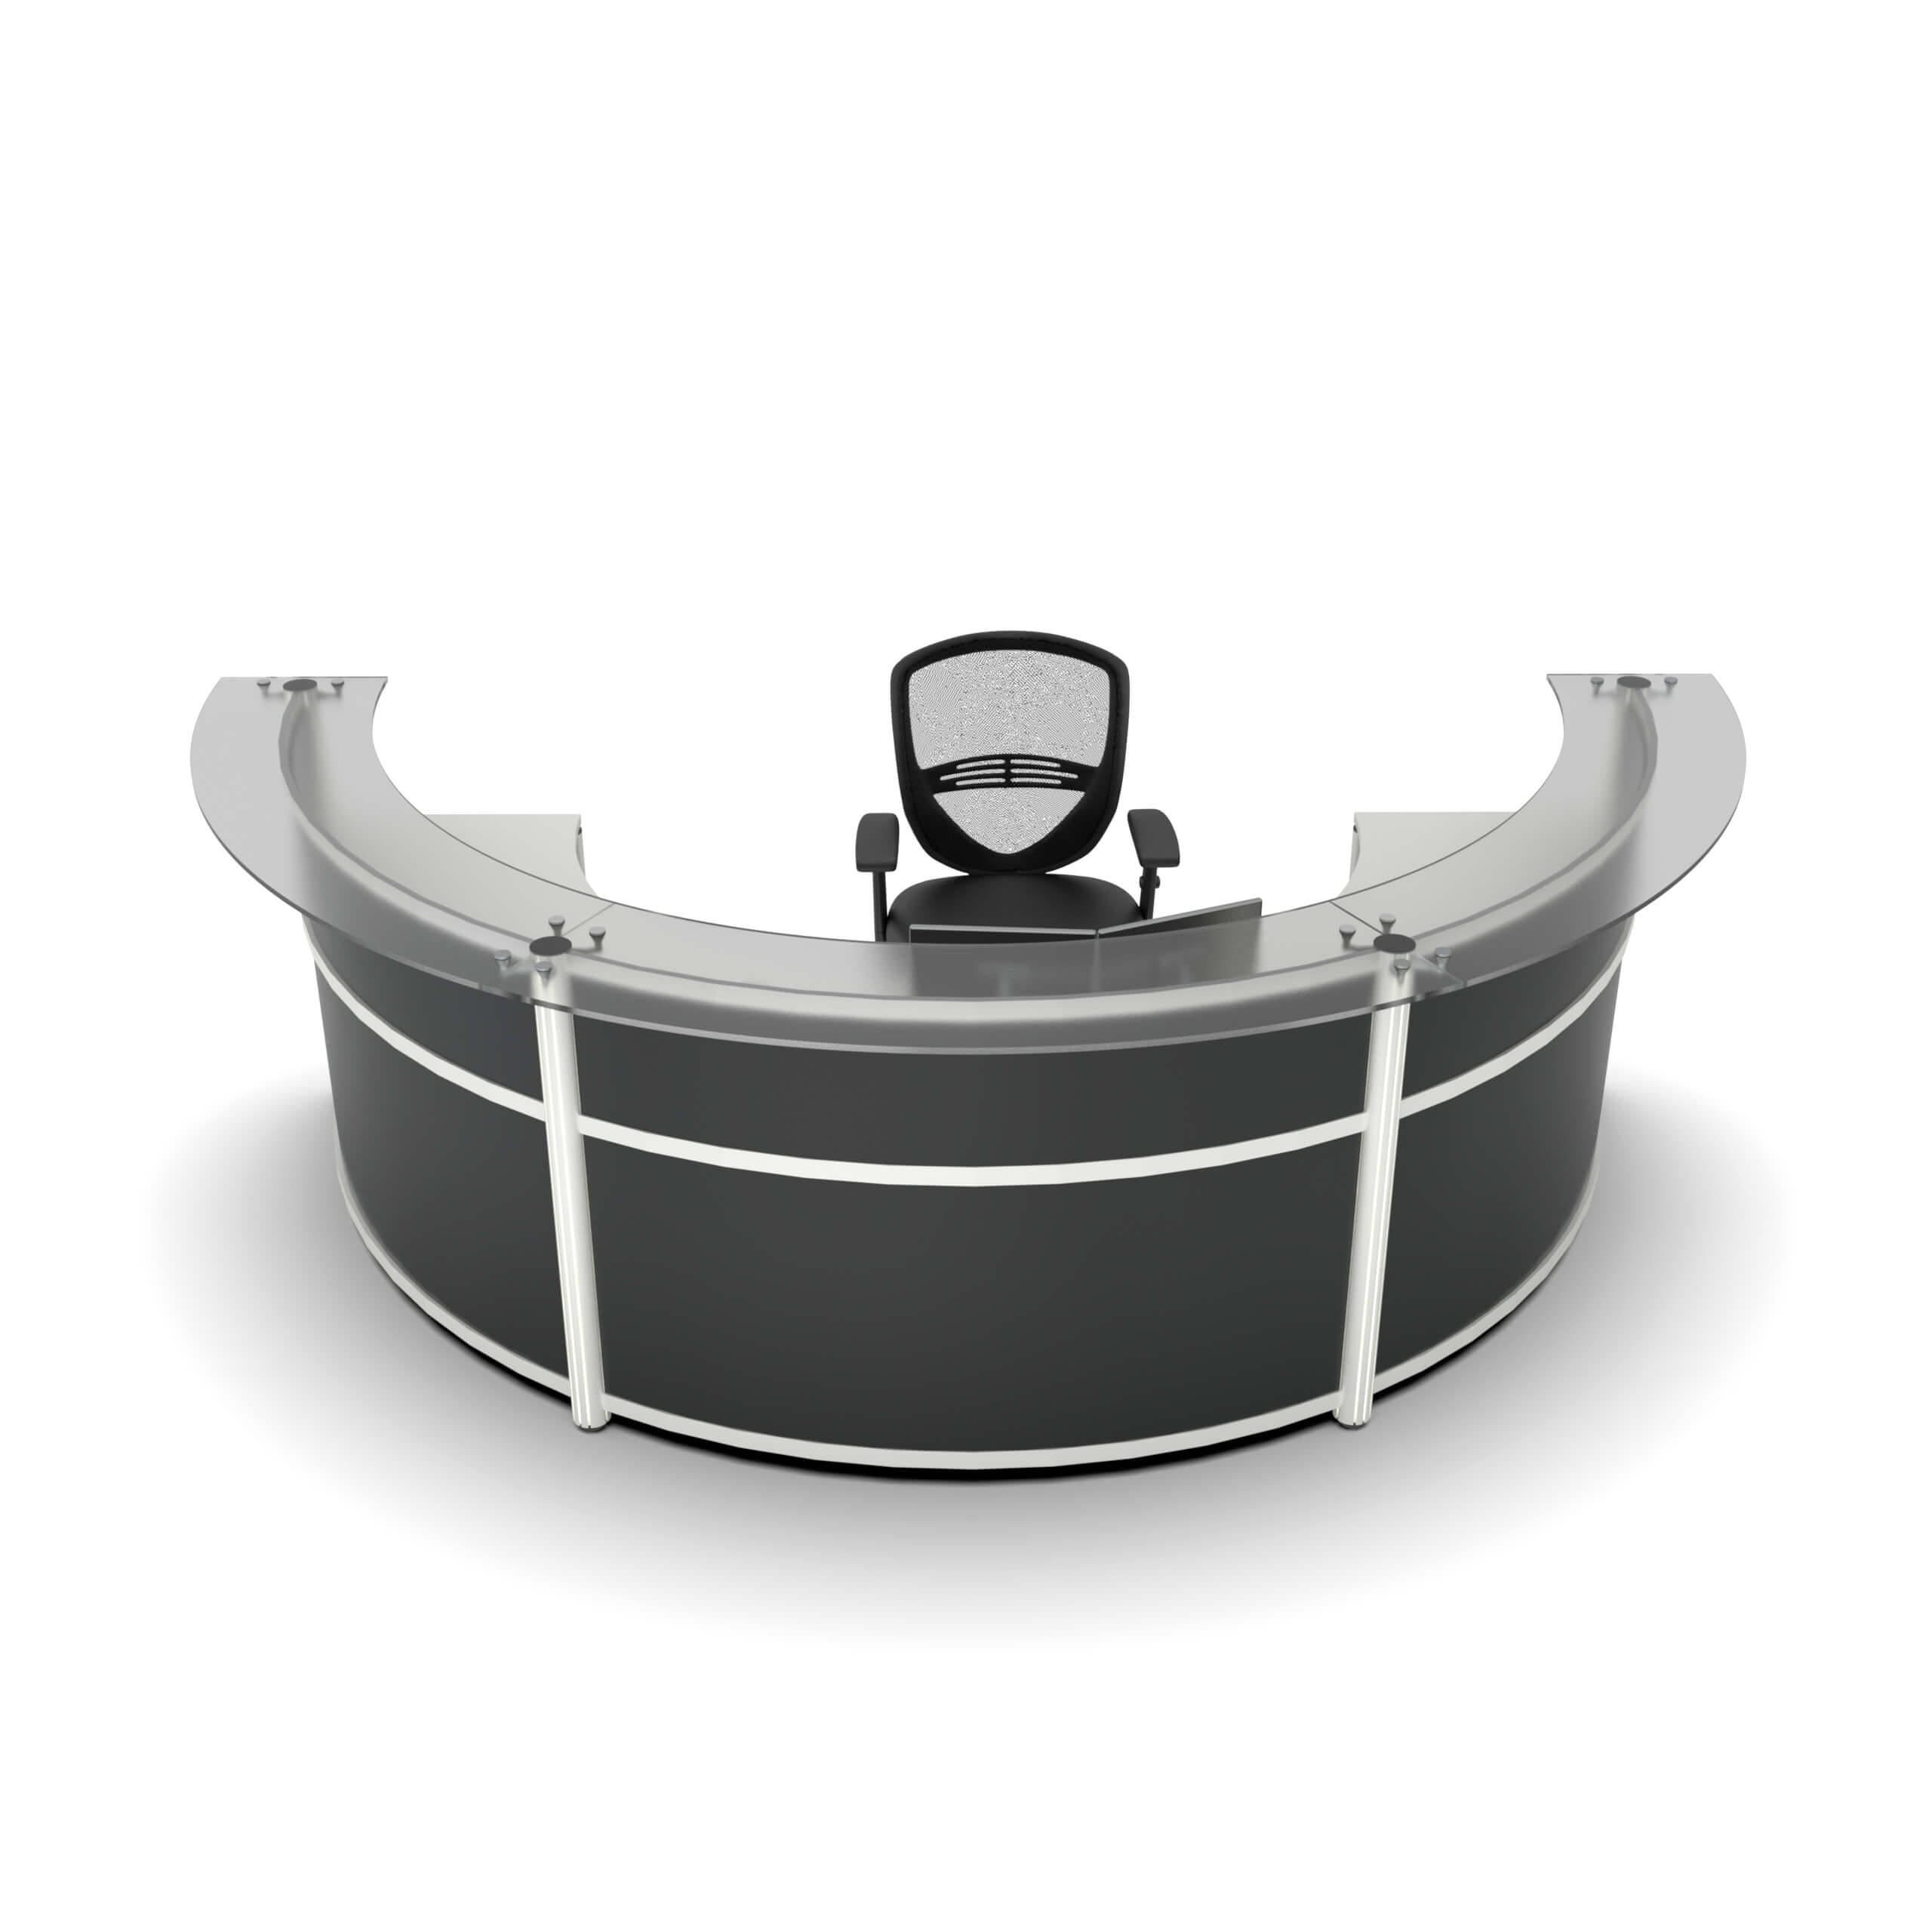 Curve round reception desk with glass transaction top front view